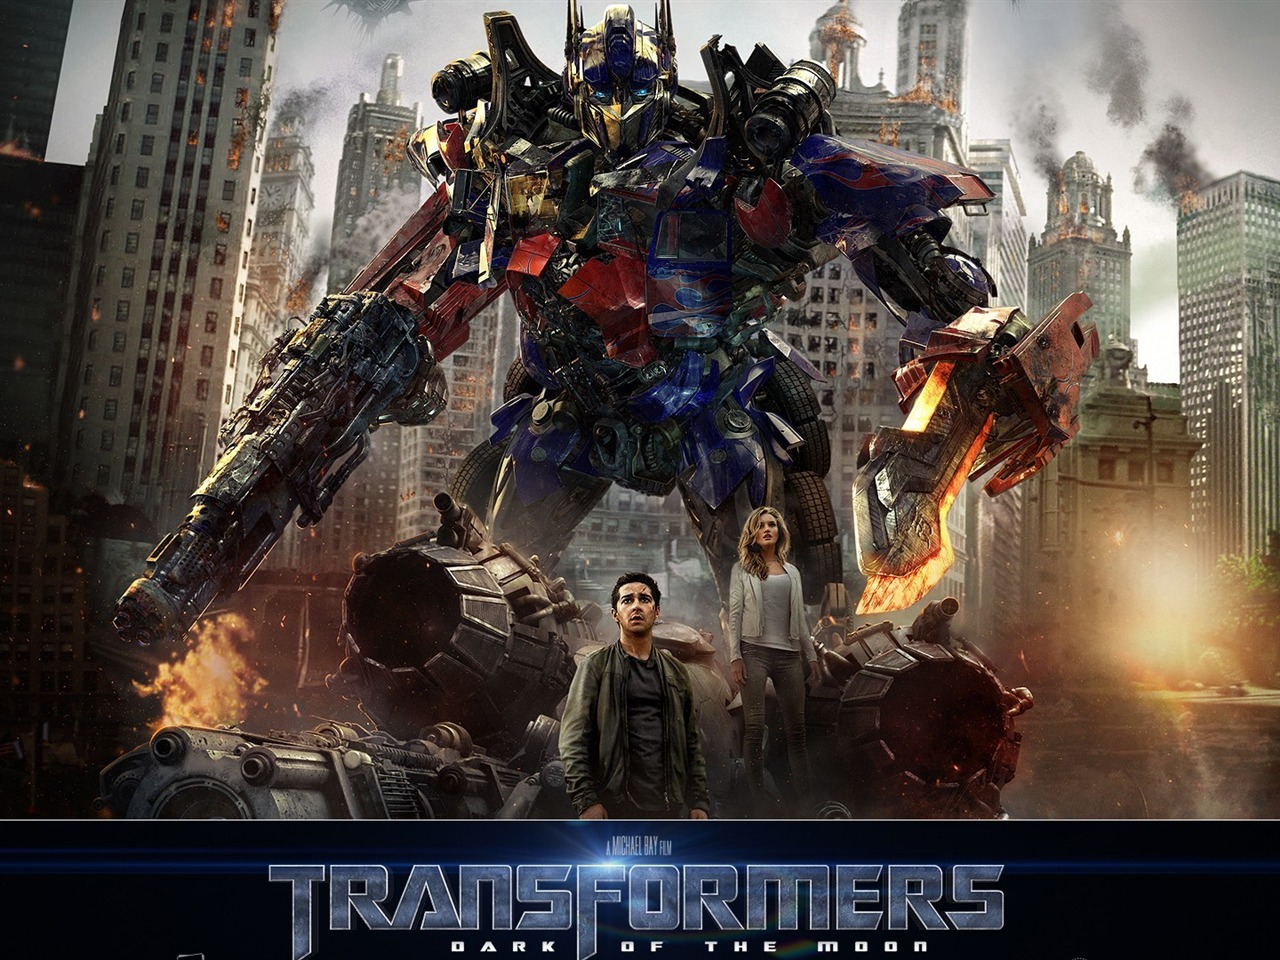 Transformers 3-Dark of the Moon HD Movie Wallpapers 04 - 1280x960 ...